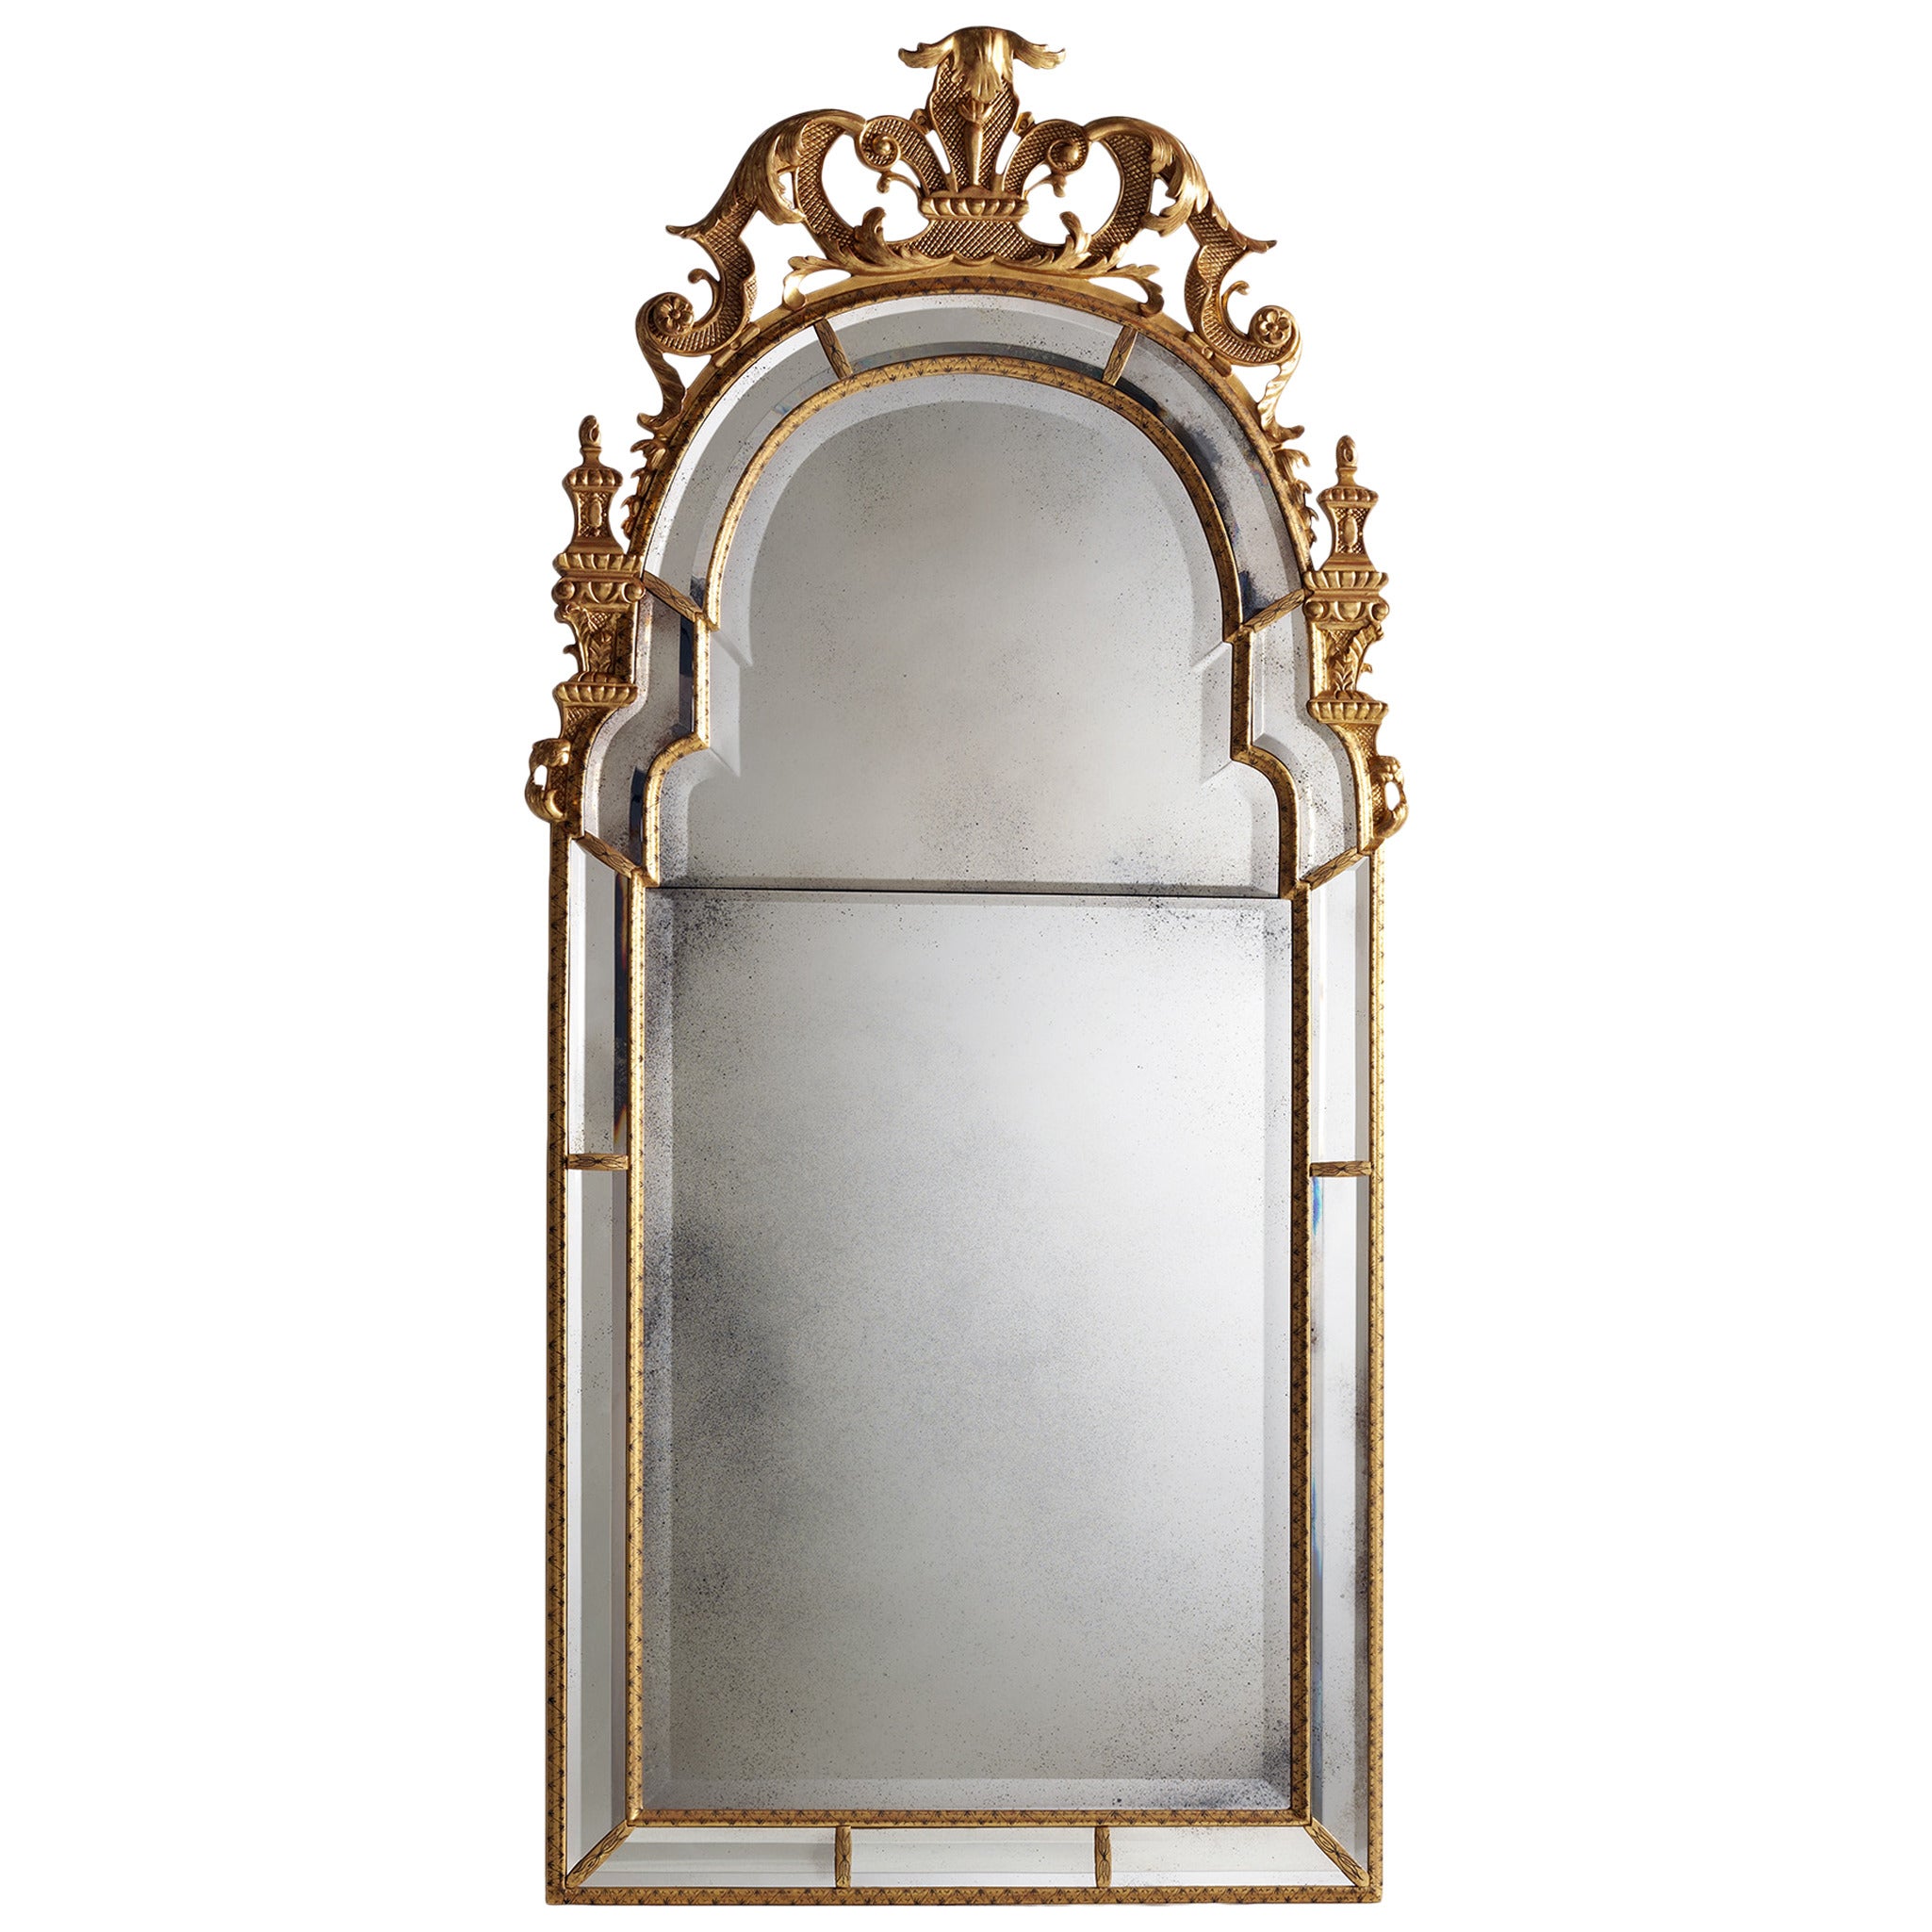 British Stately Homes Wakefield Mirror with Panels in Gold and Gold-Black Trim